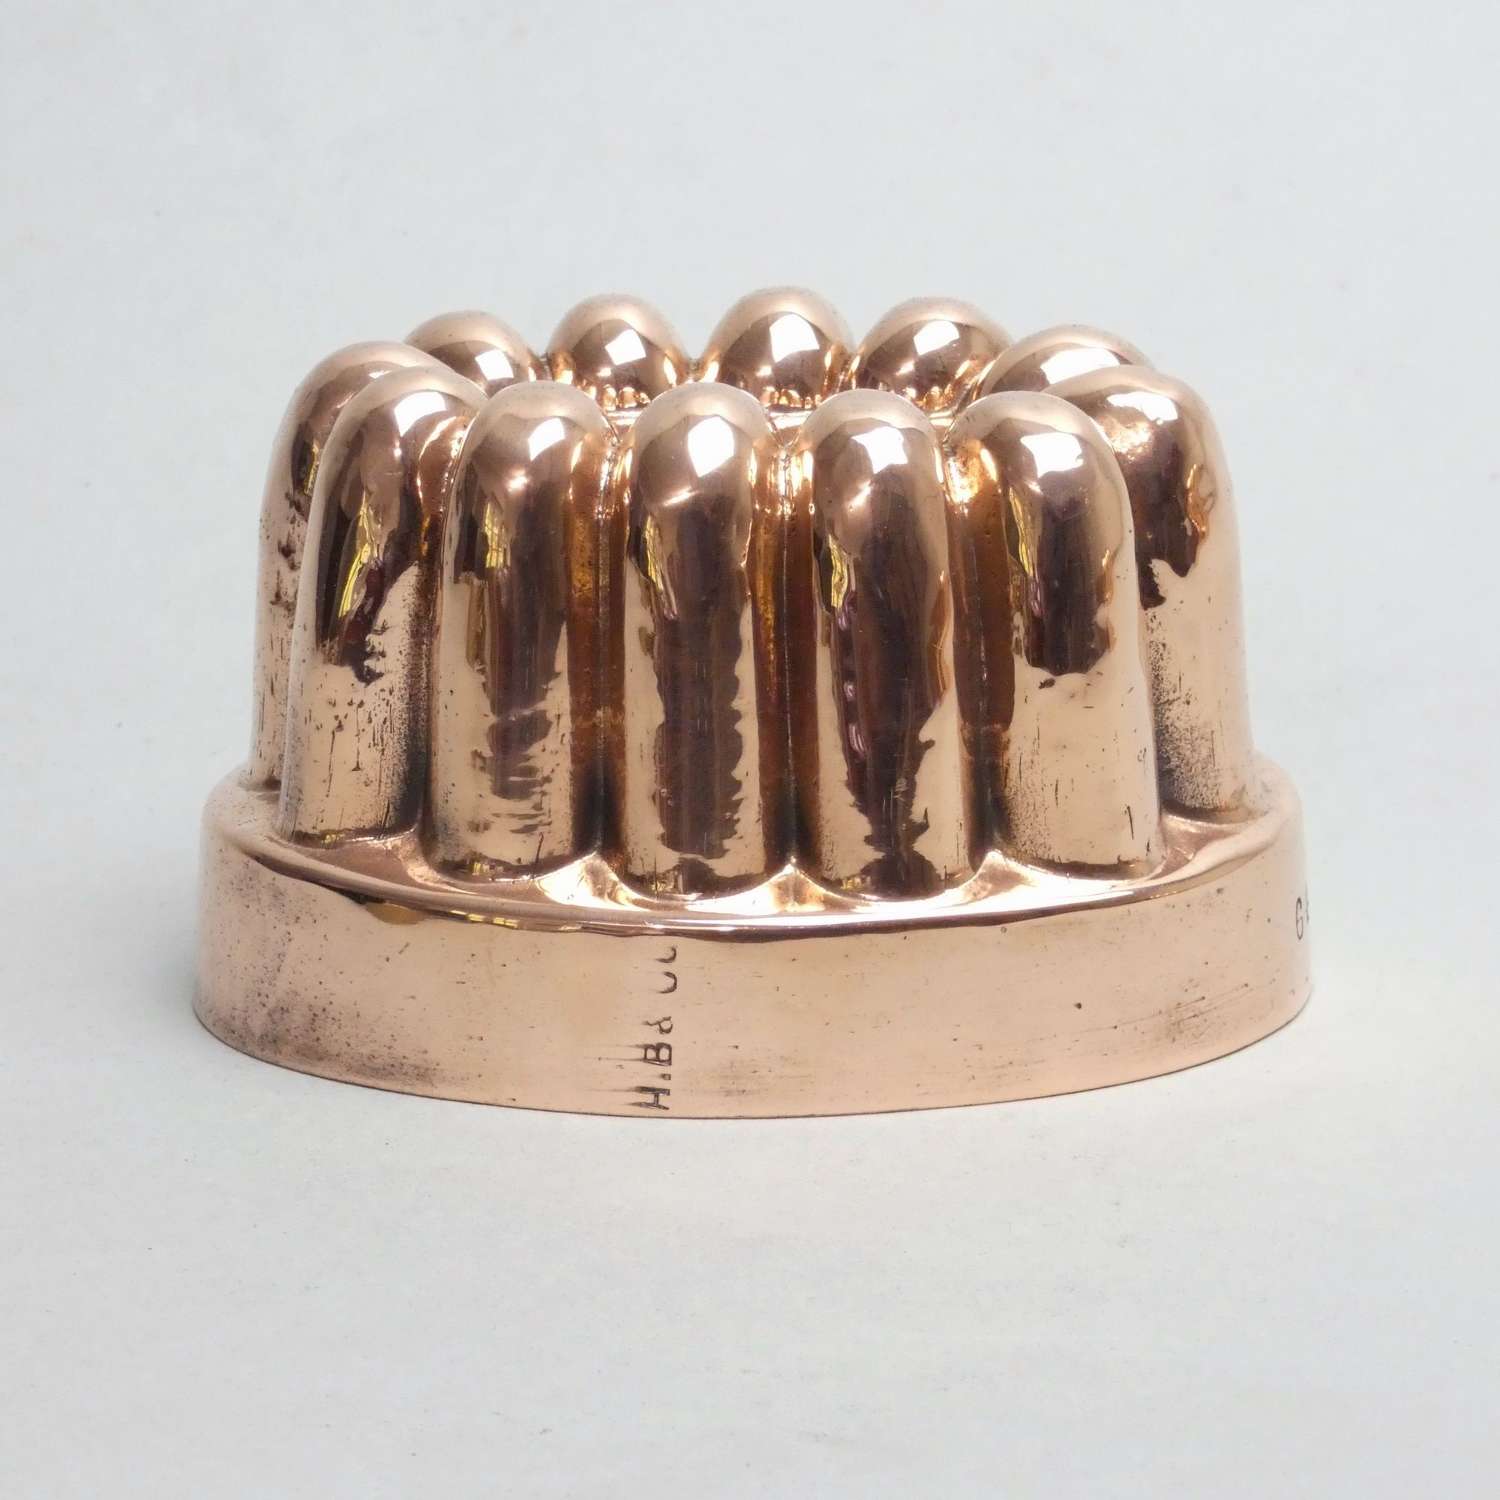 Small, fluted copper jelly mould